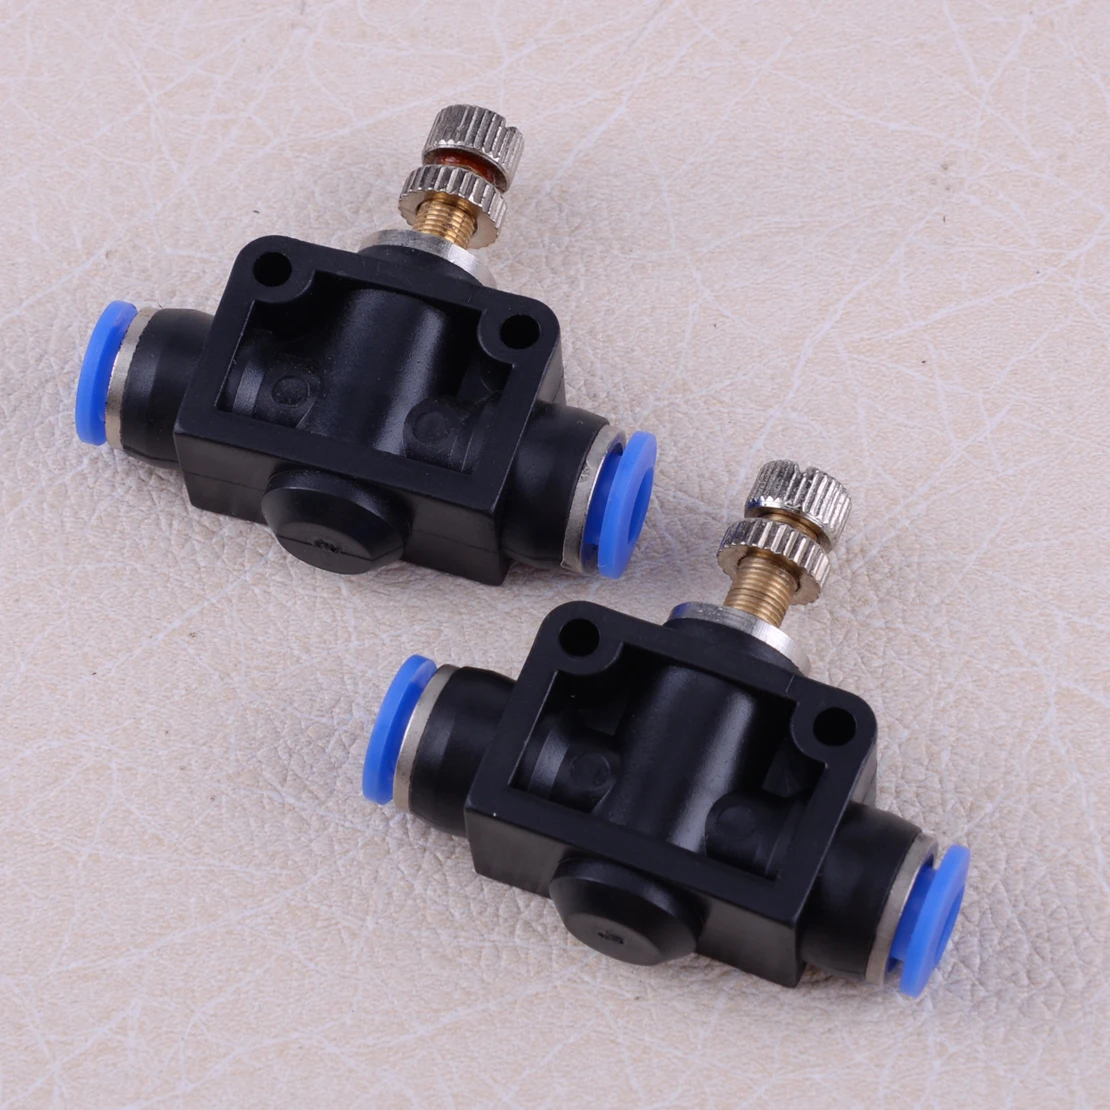 

LETAOSK 2Pcs Air Flow 6mm 1/4" OD Speed Controller Valve Pneumatic Push In Fitting Air Hose Tube